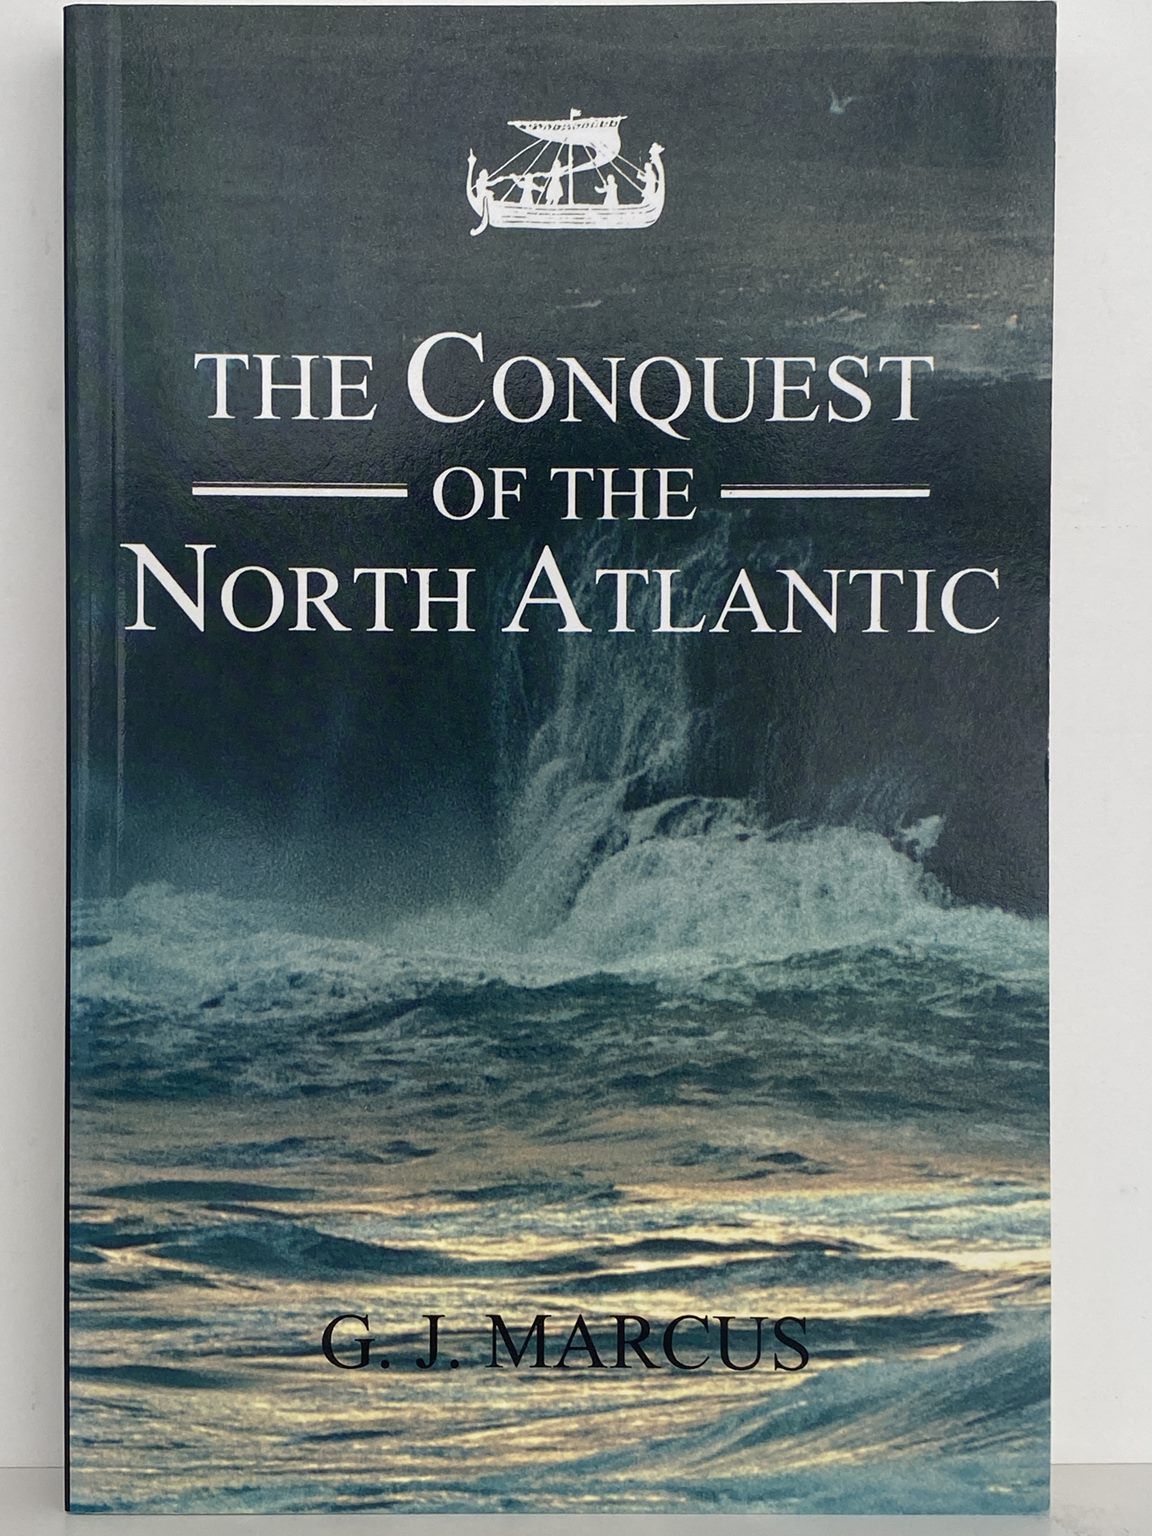 THE CONQUEST OF THE NORTH ATLANTIC